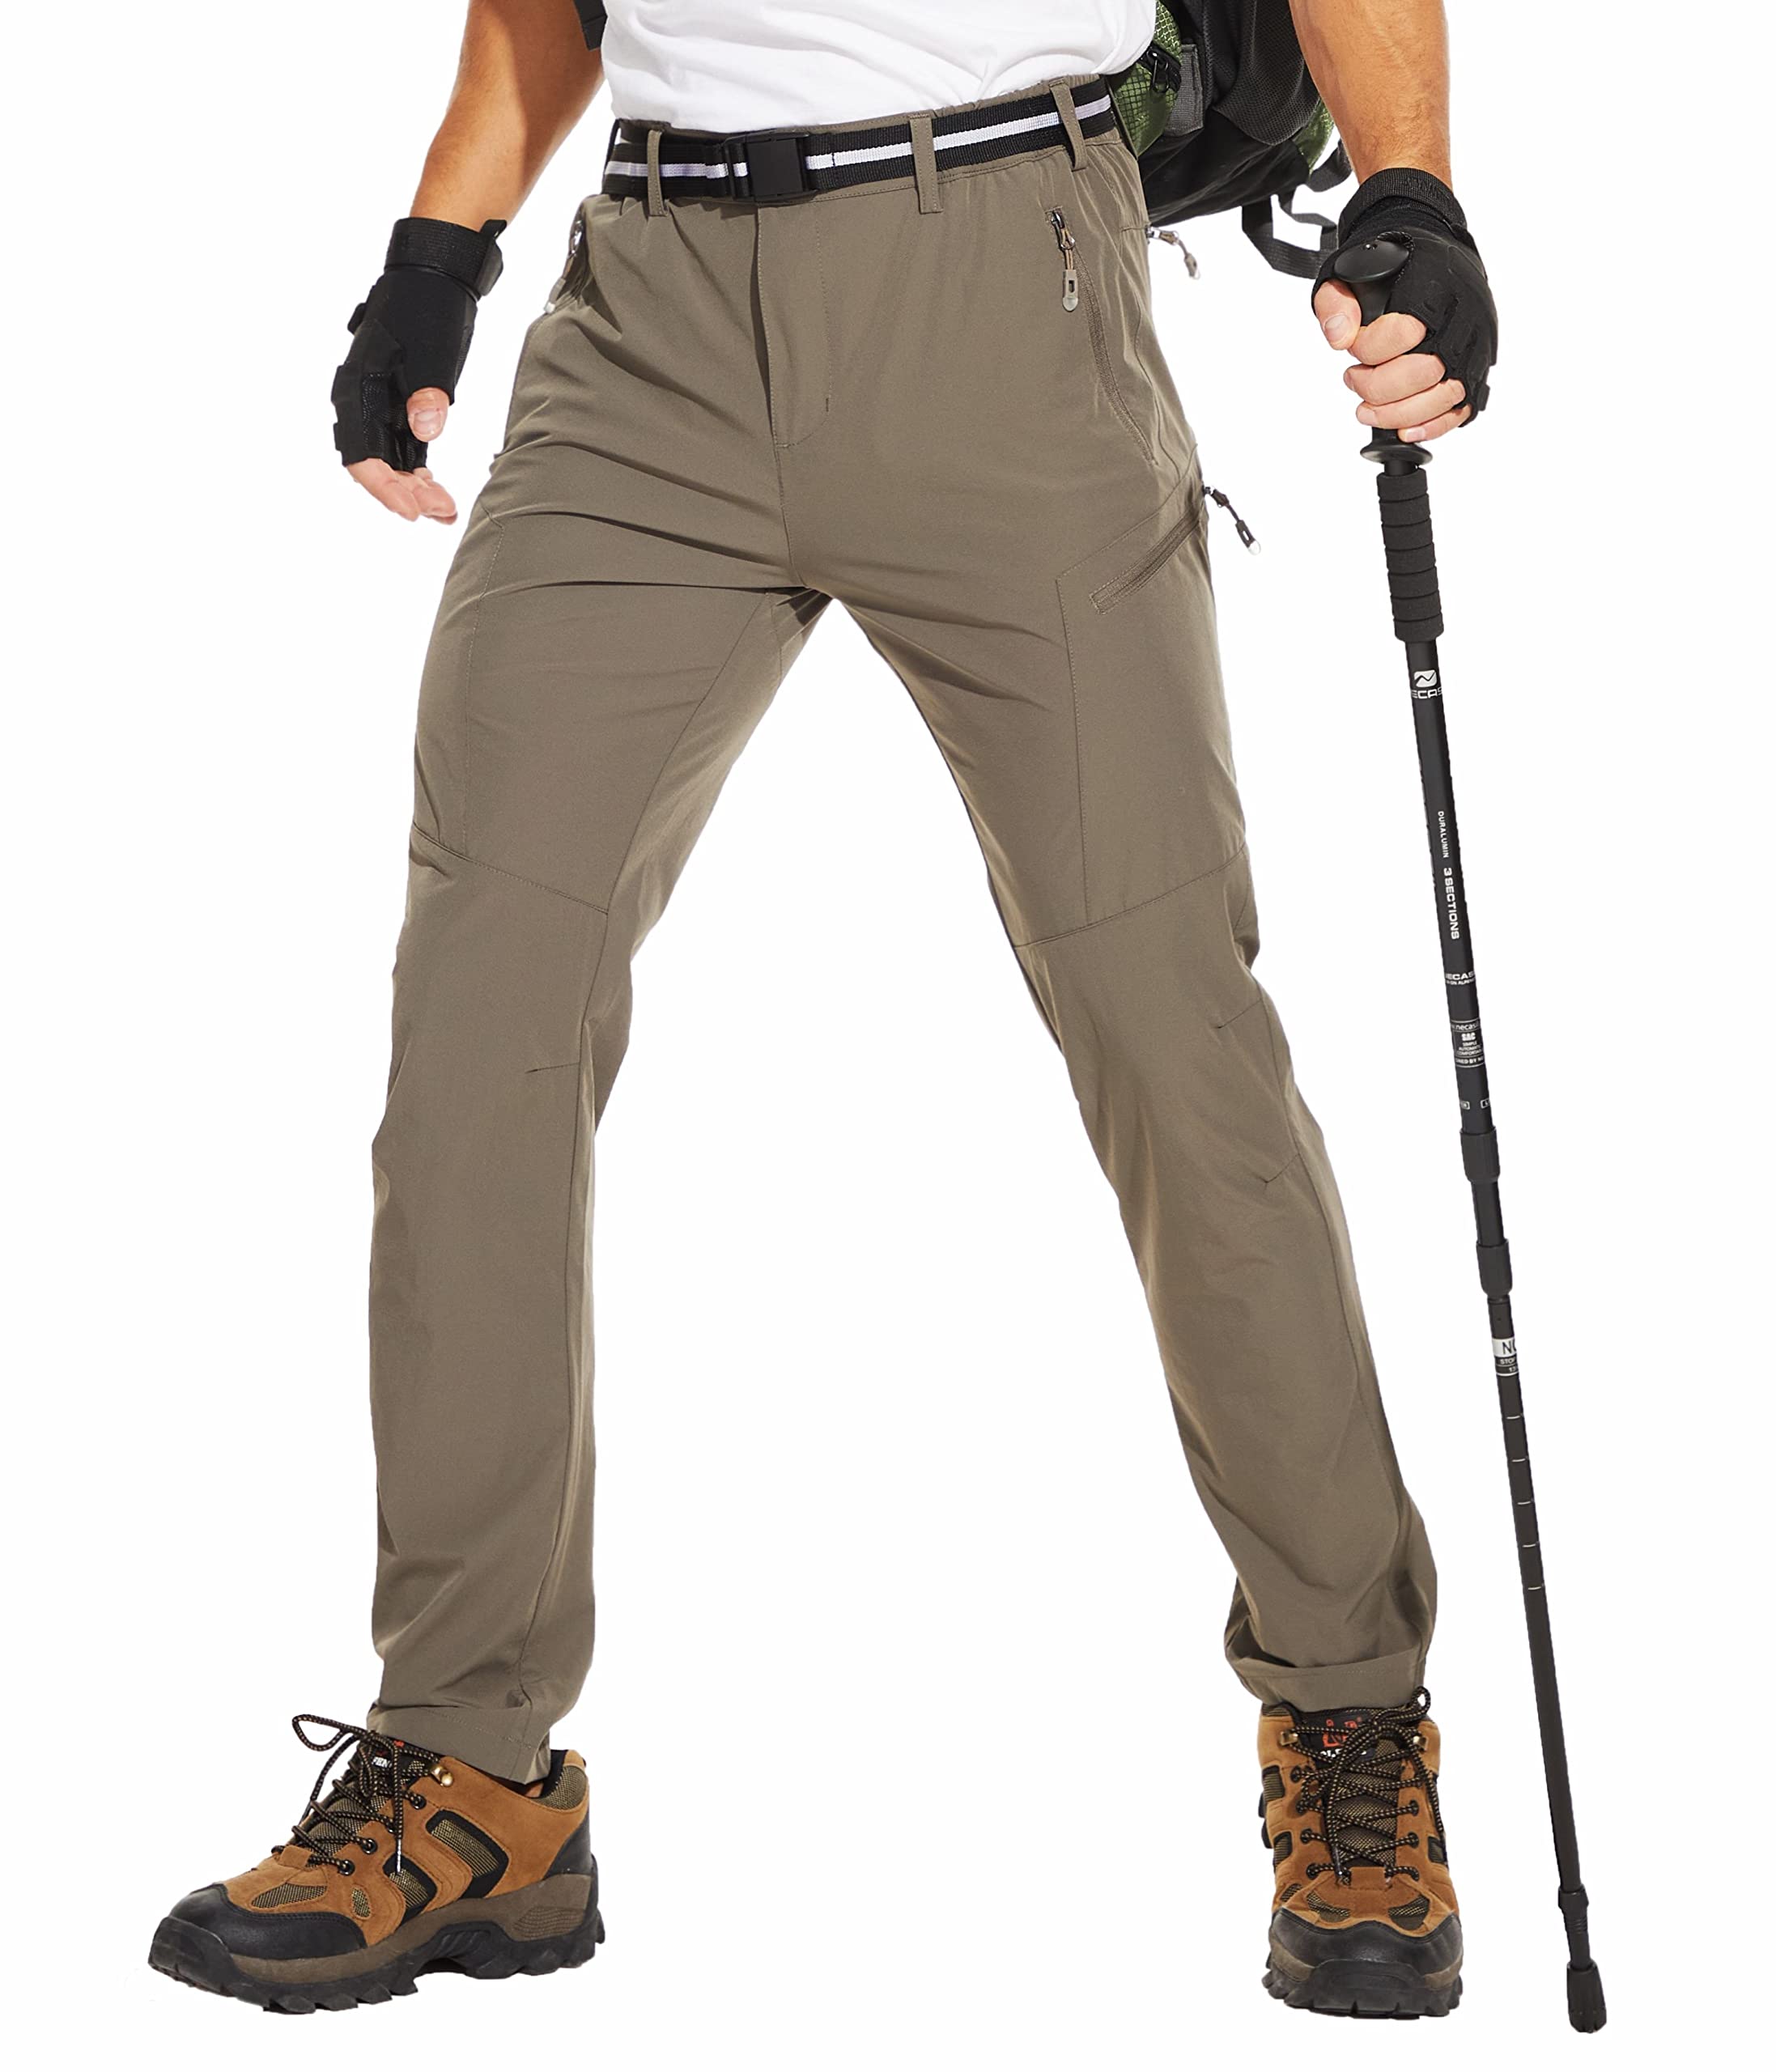 Hiking Pants for Men, Quick Dry Travel Pants Men for Stretch Work Pants  Lightweight Outdoor Pants Water-Resistant